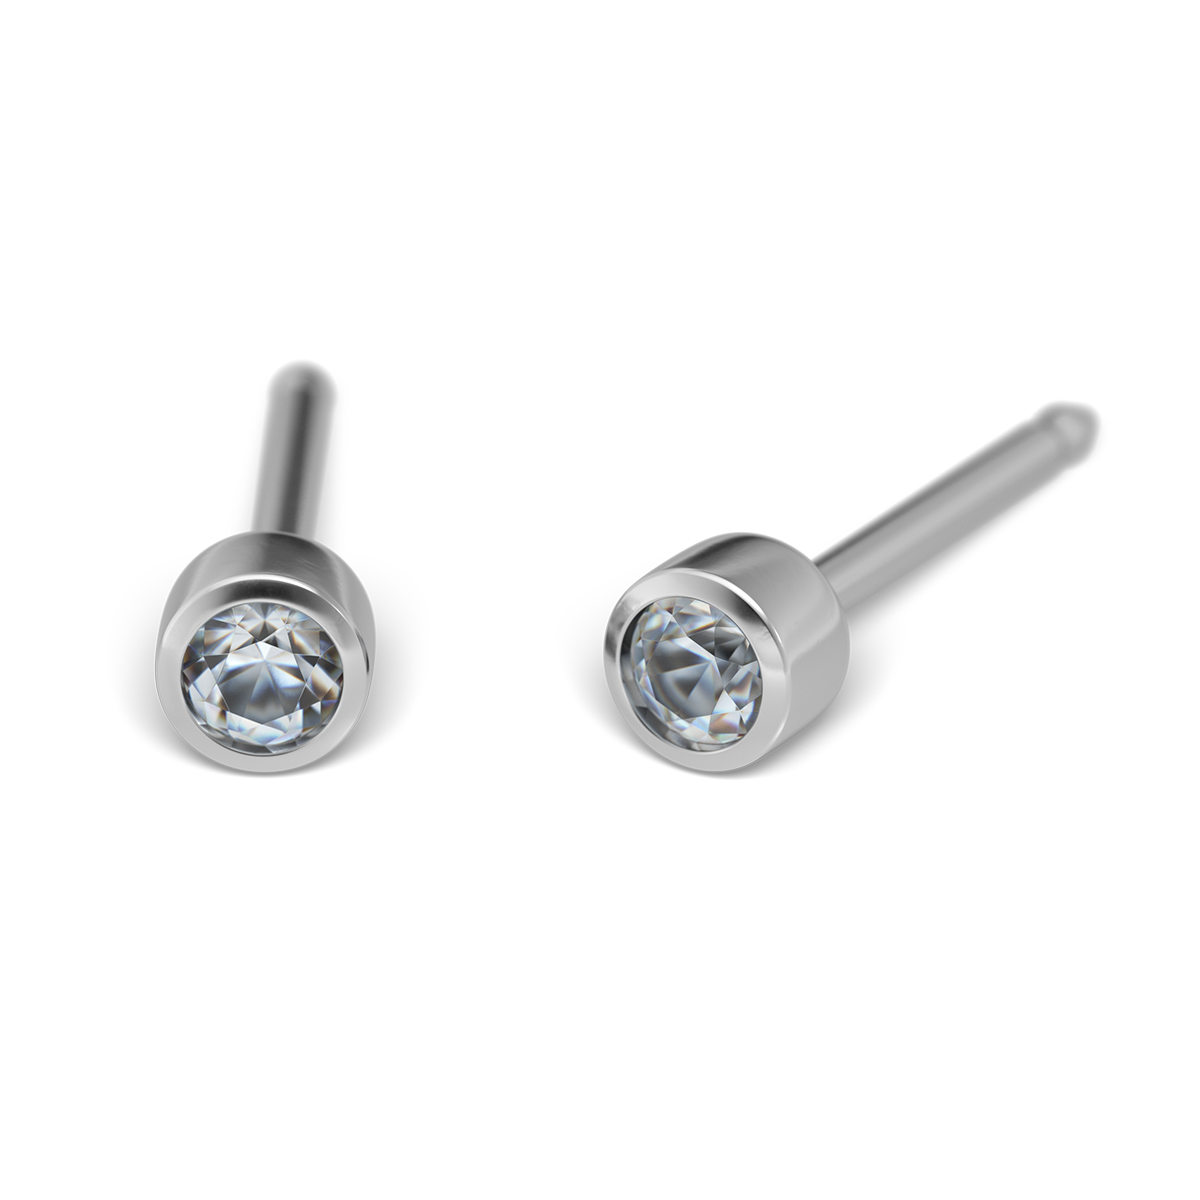 System 75 ear studs, 14 ct yellow gold rhodium plated